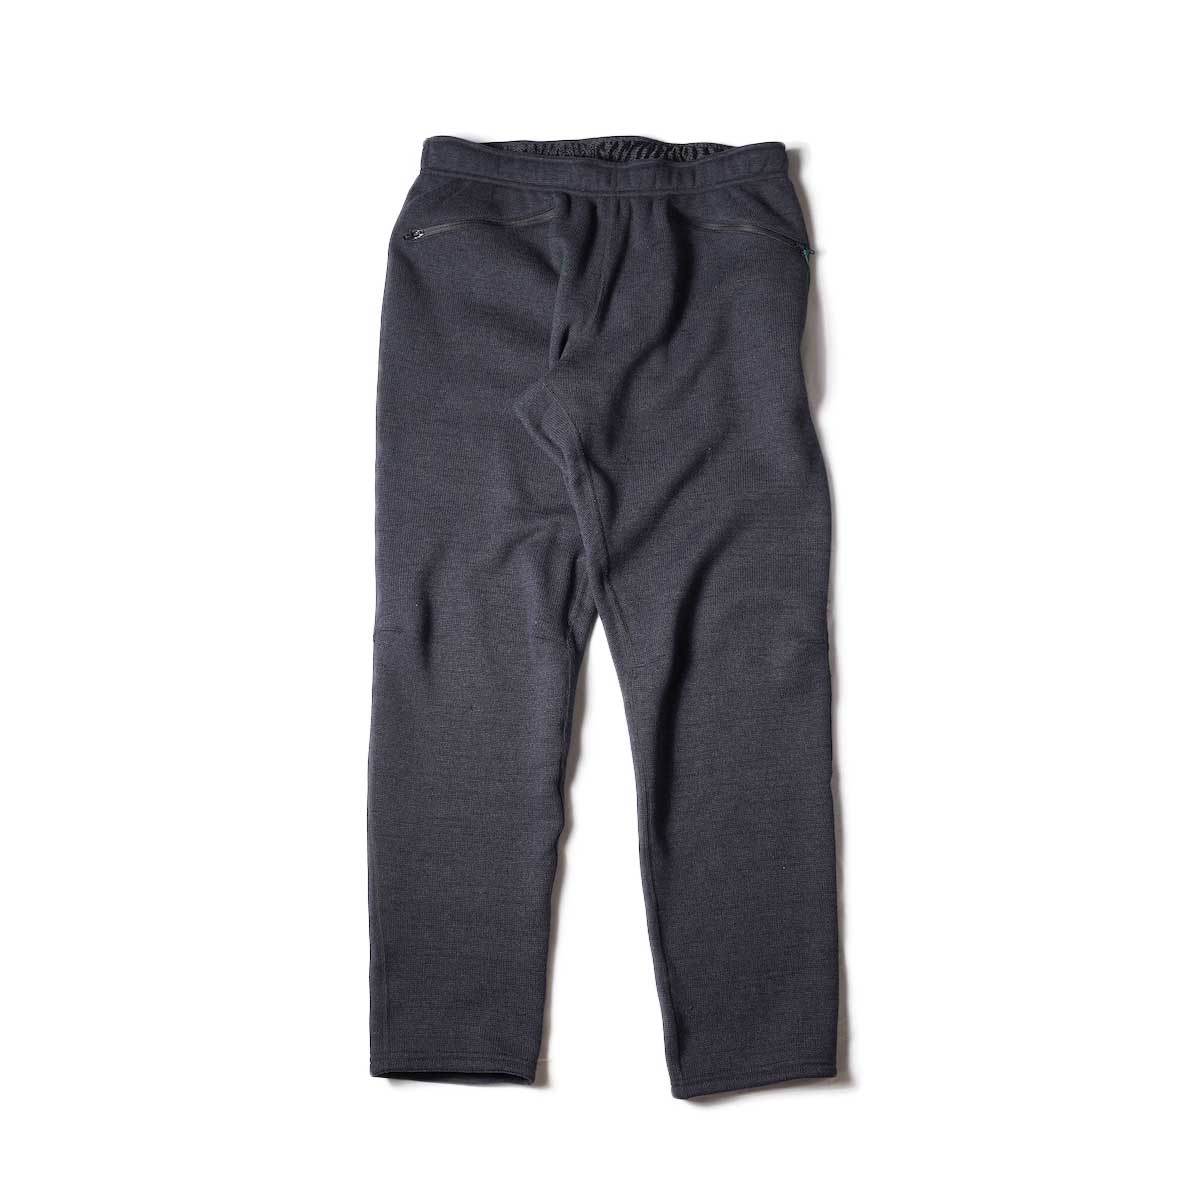 South2 West8 / 2P Cycle Pant - POLARTEC Fleece Lined Jersey (Black)